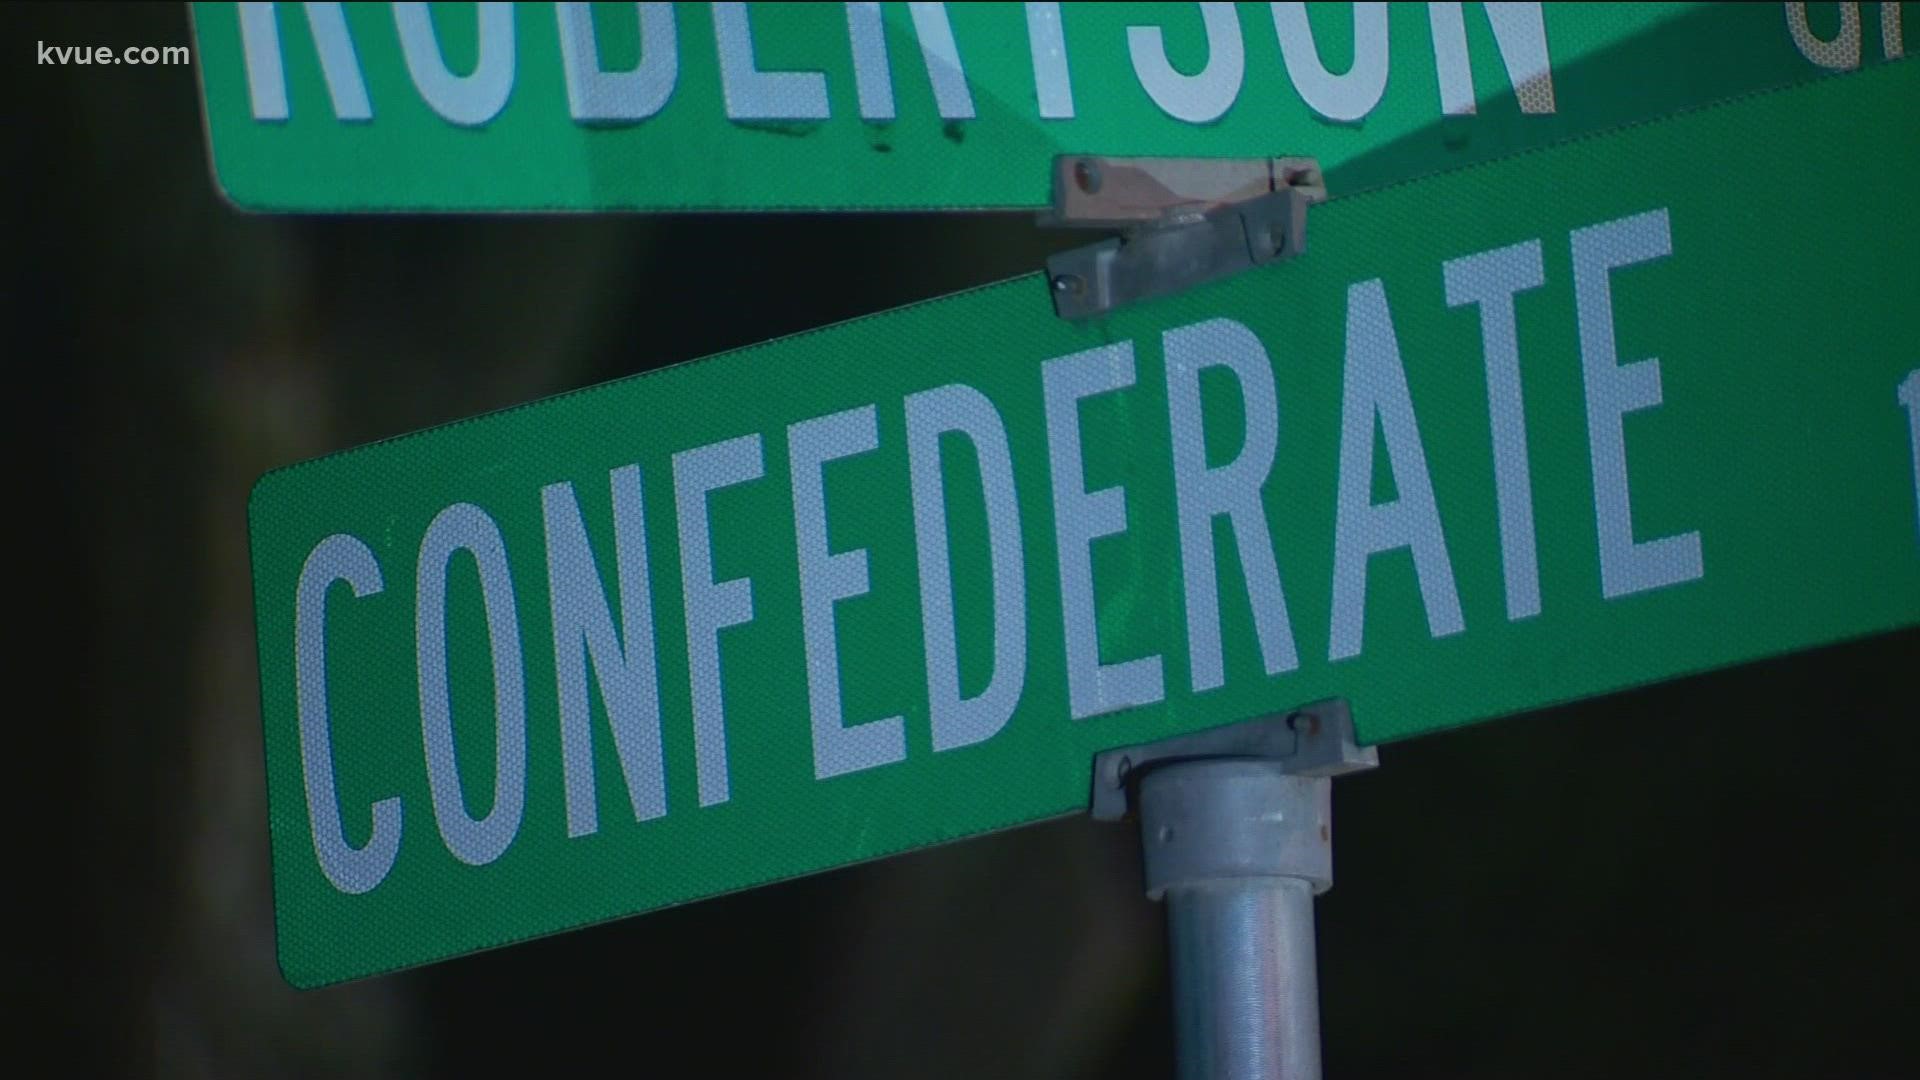 The Austin City Council could vote to rename a street in West Austin.